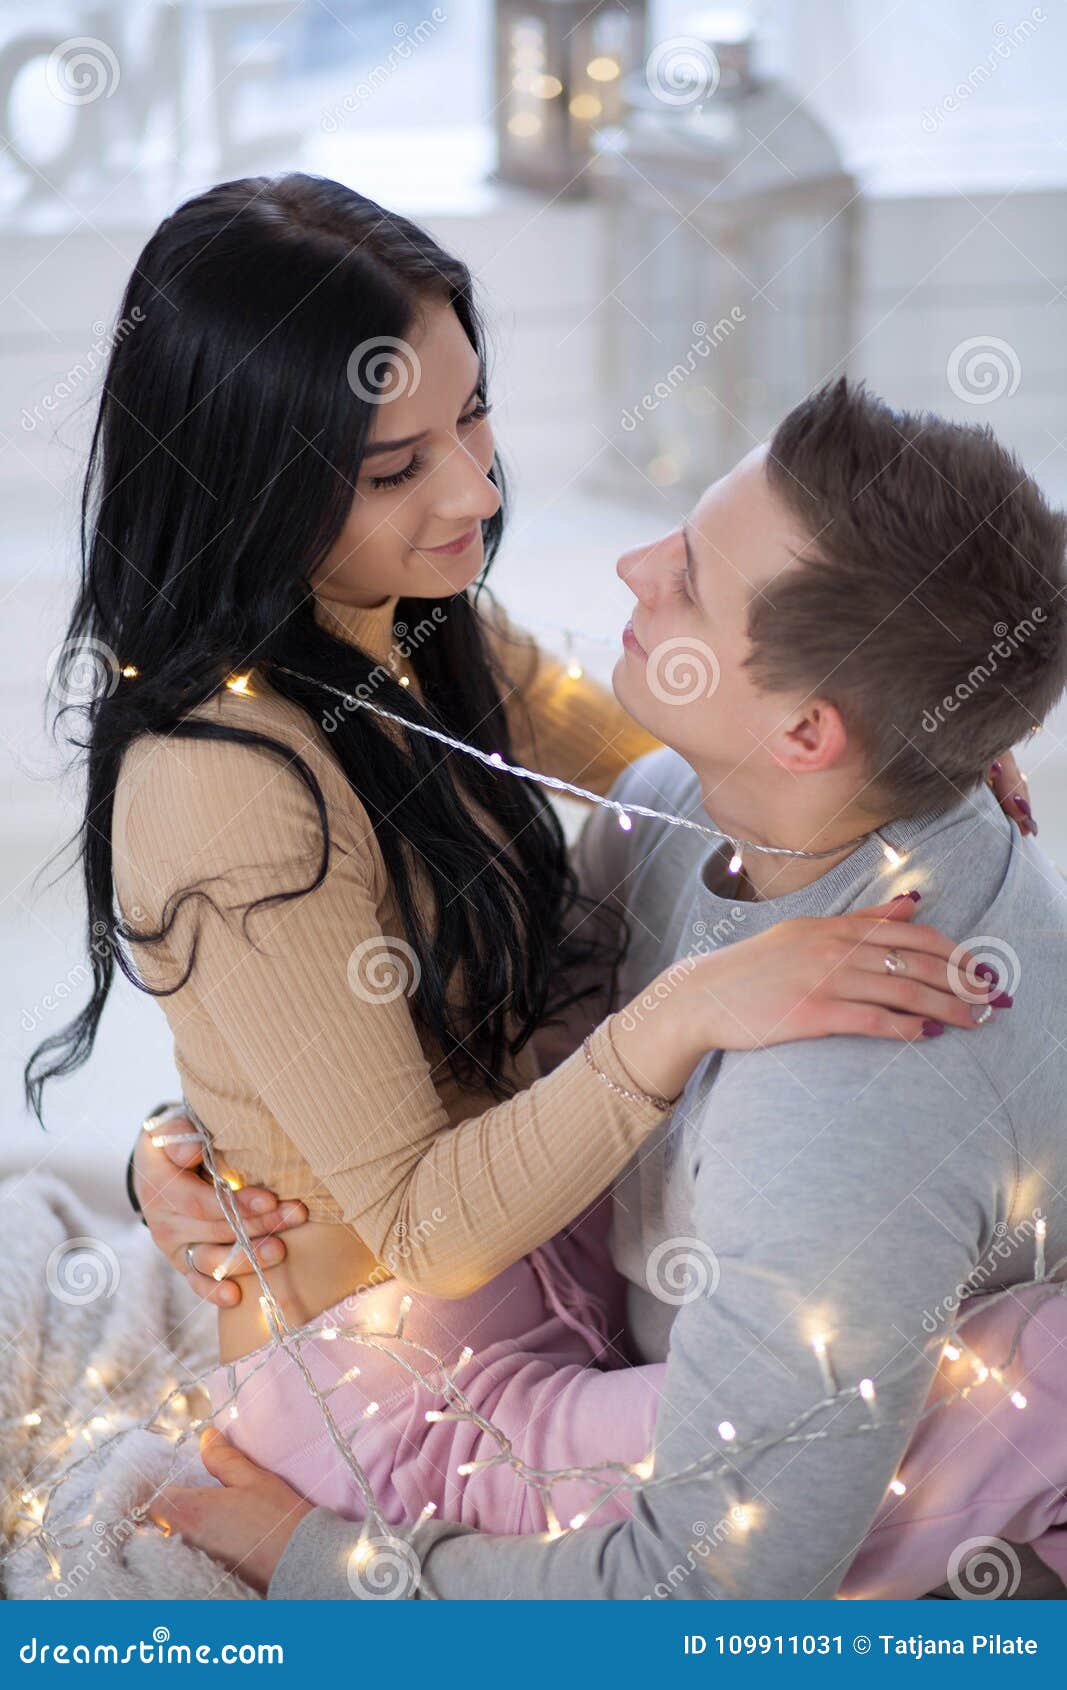 Couple in Love Hugging and Kissing at Home Stock Image - Image of light,  hugging: 109911031